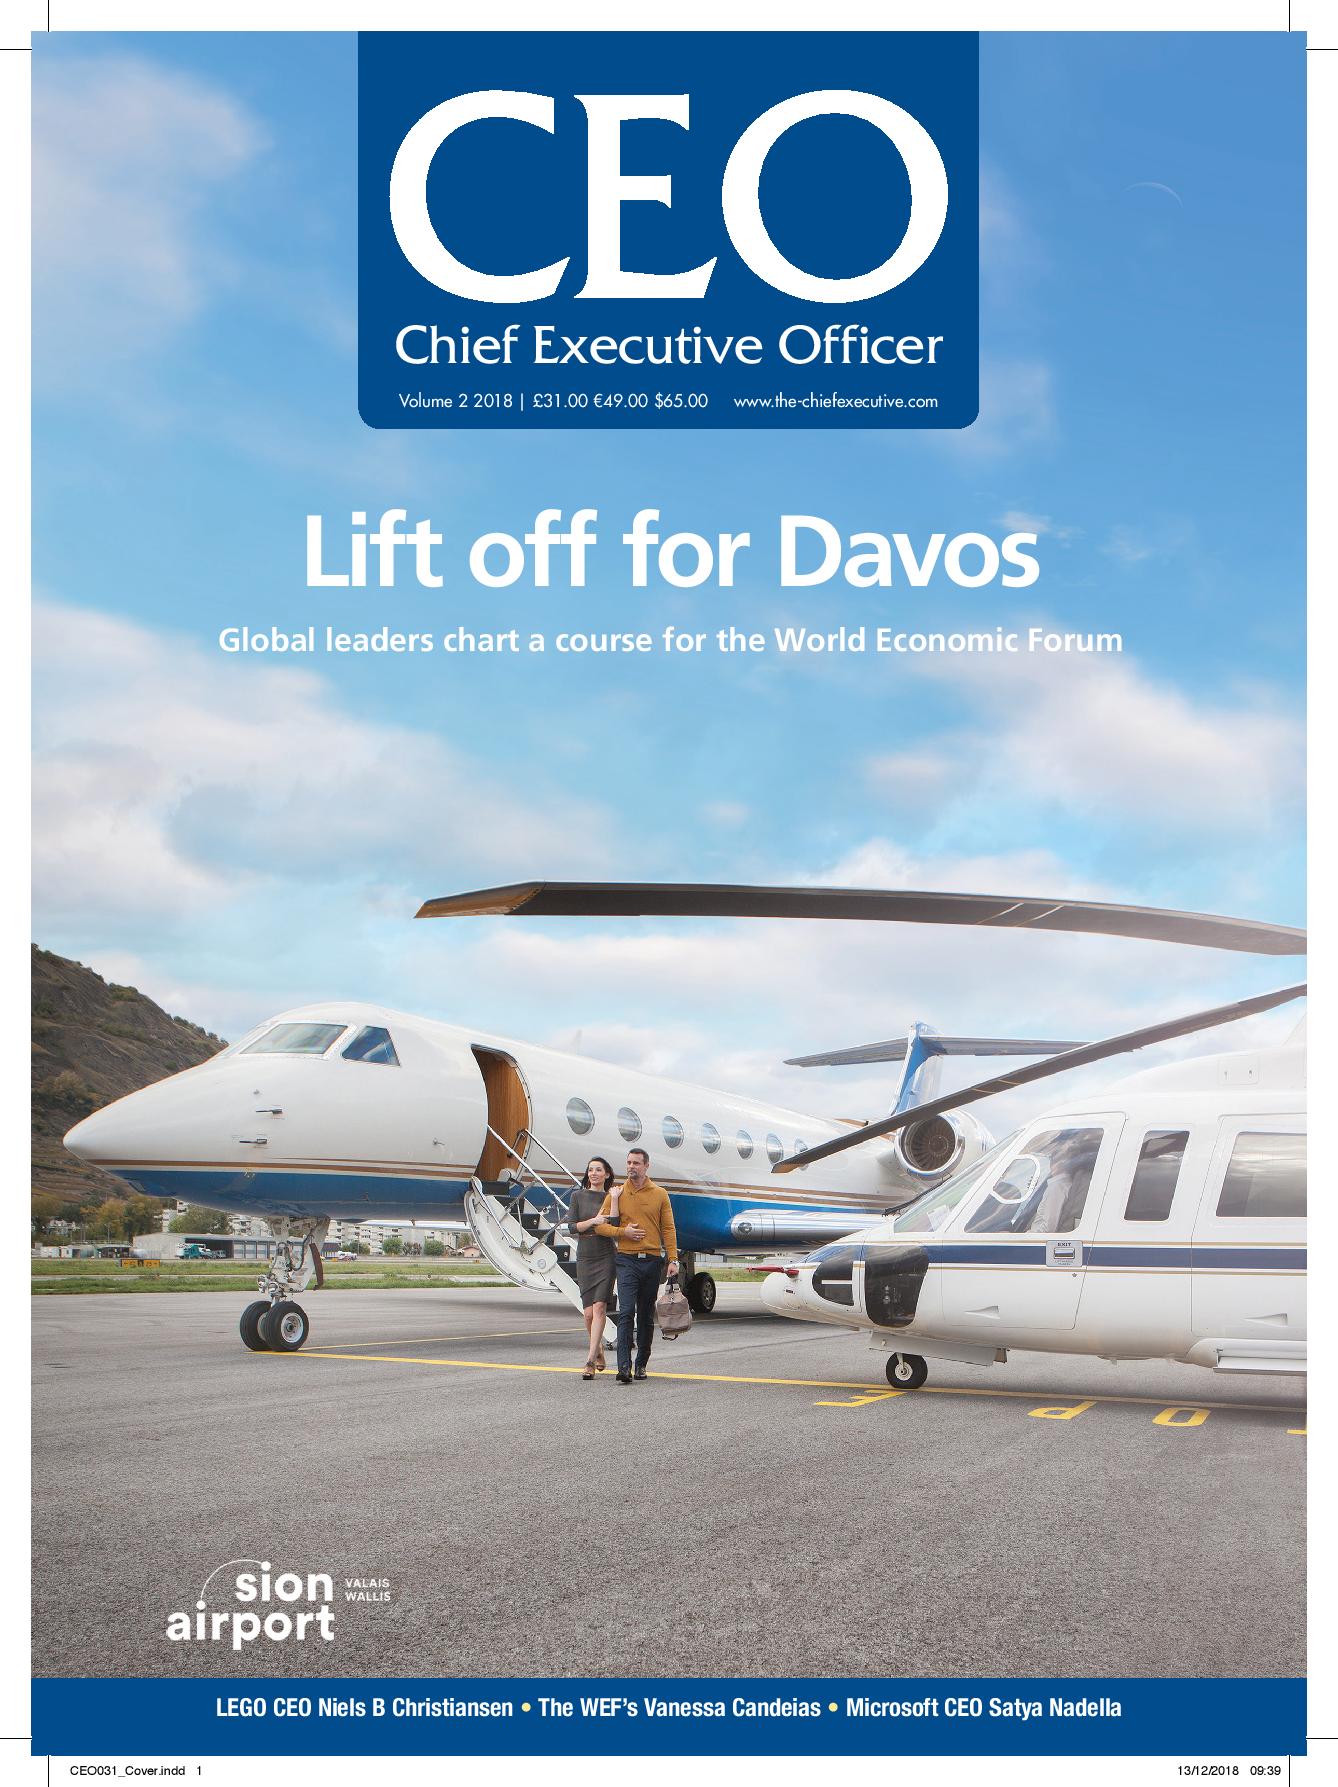 Chief Executive Officer Issue 1 2018